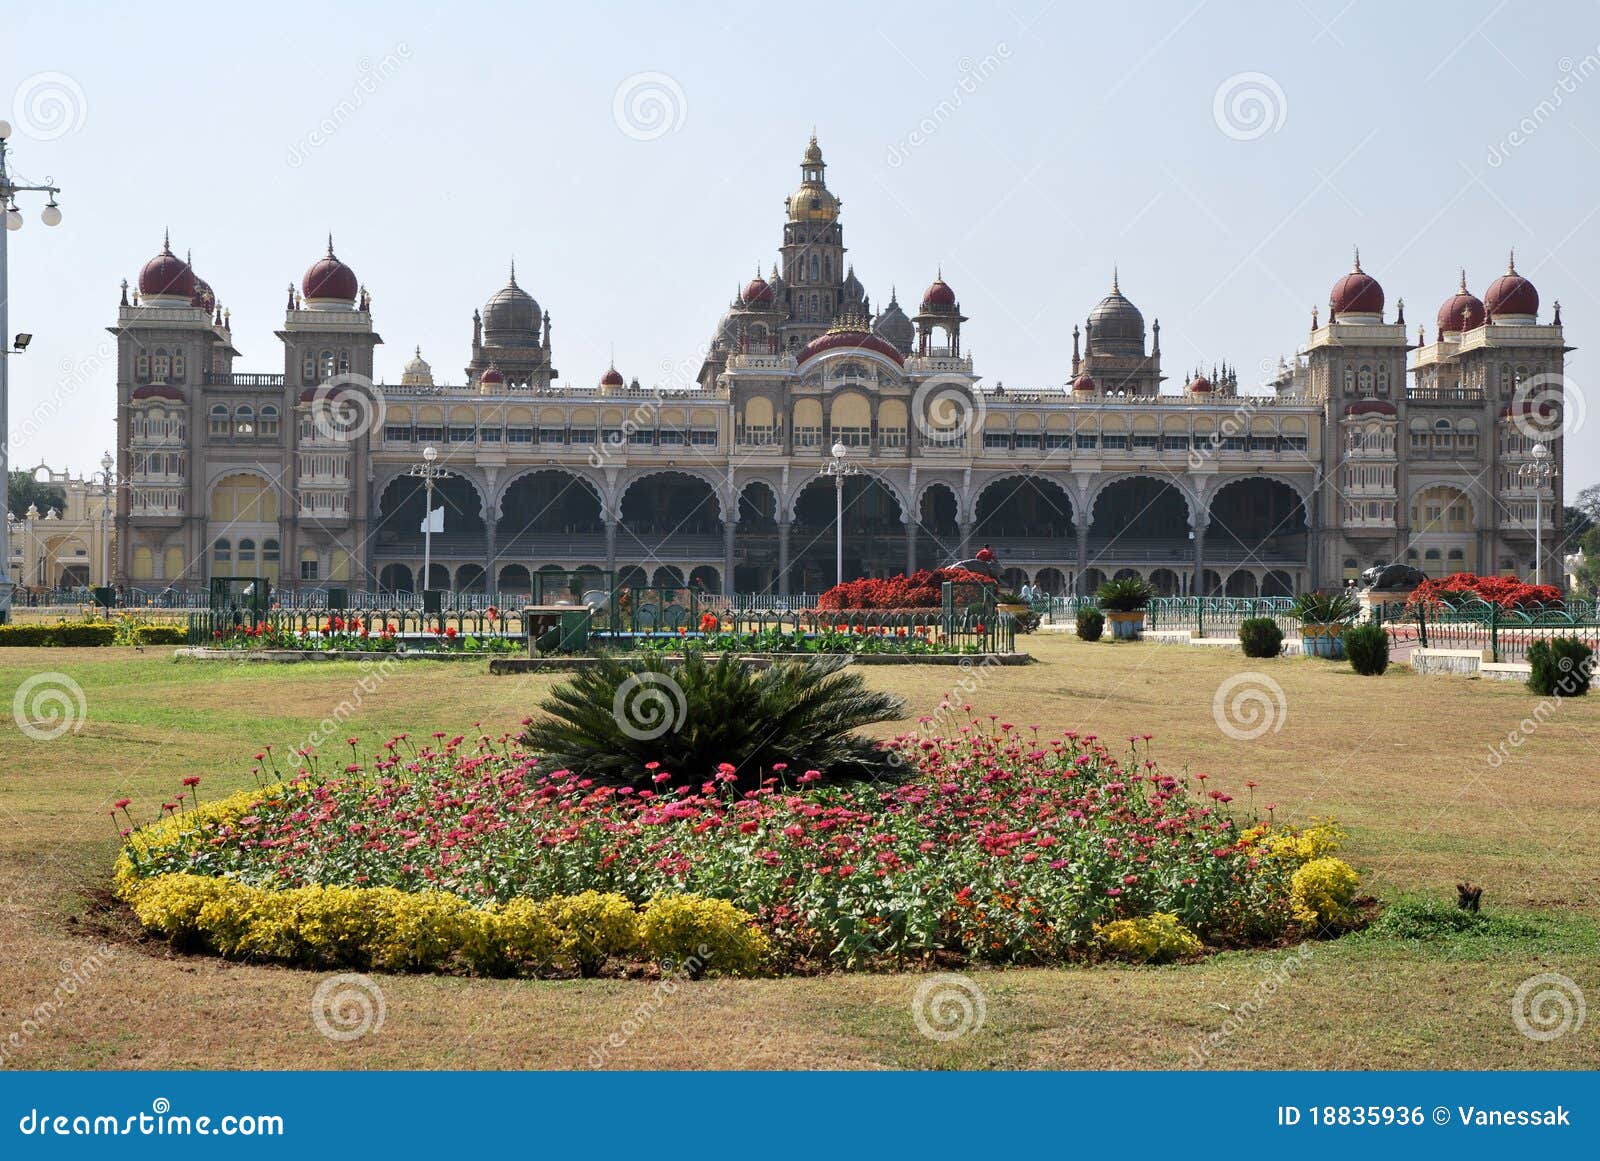 the mysore palace in india